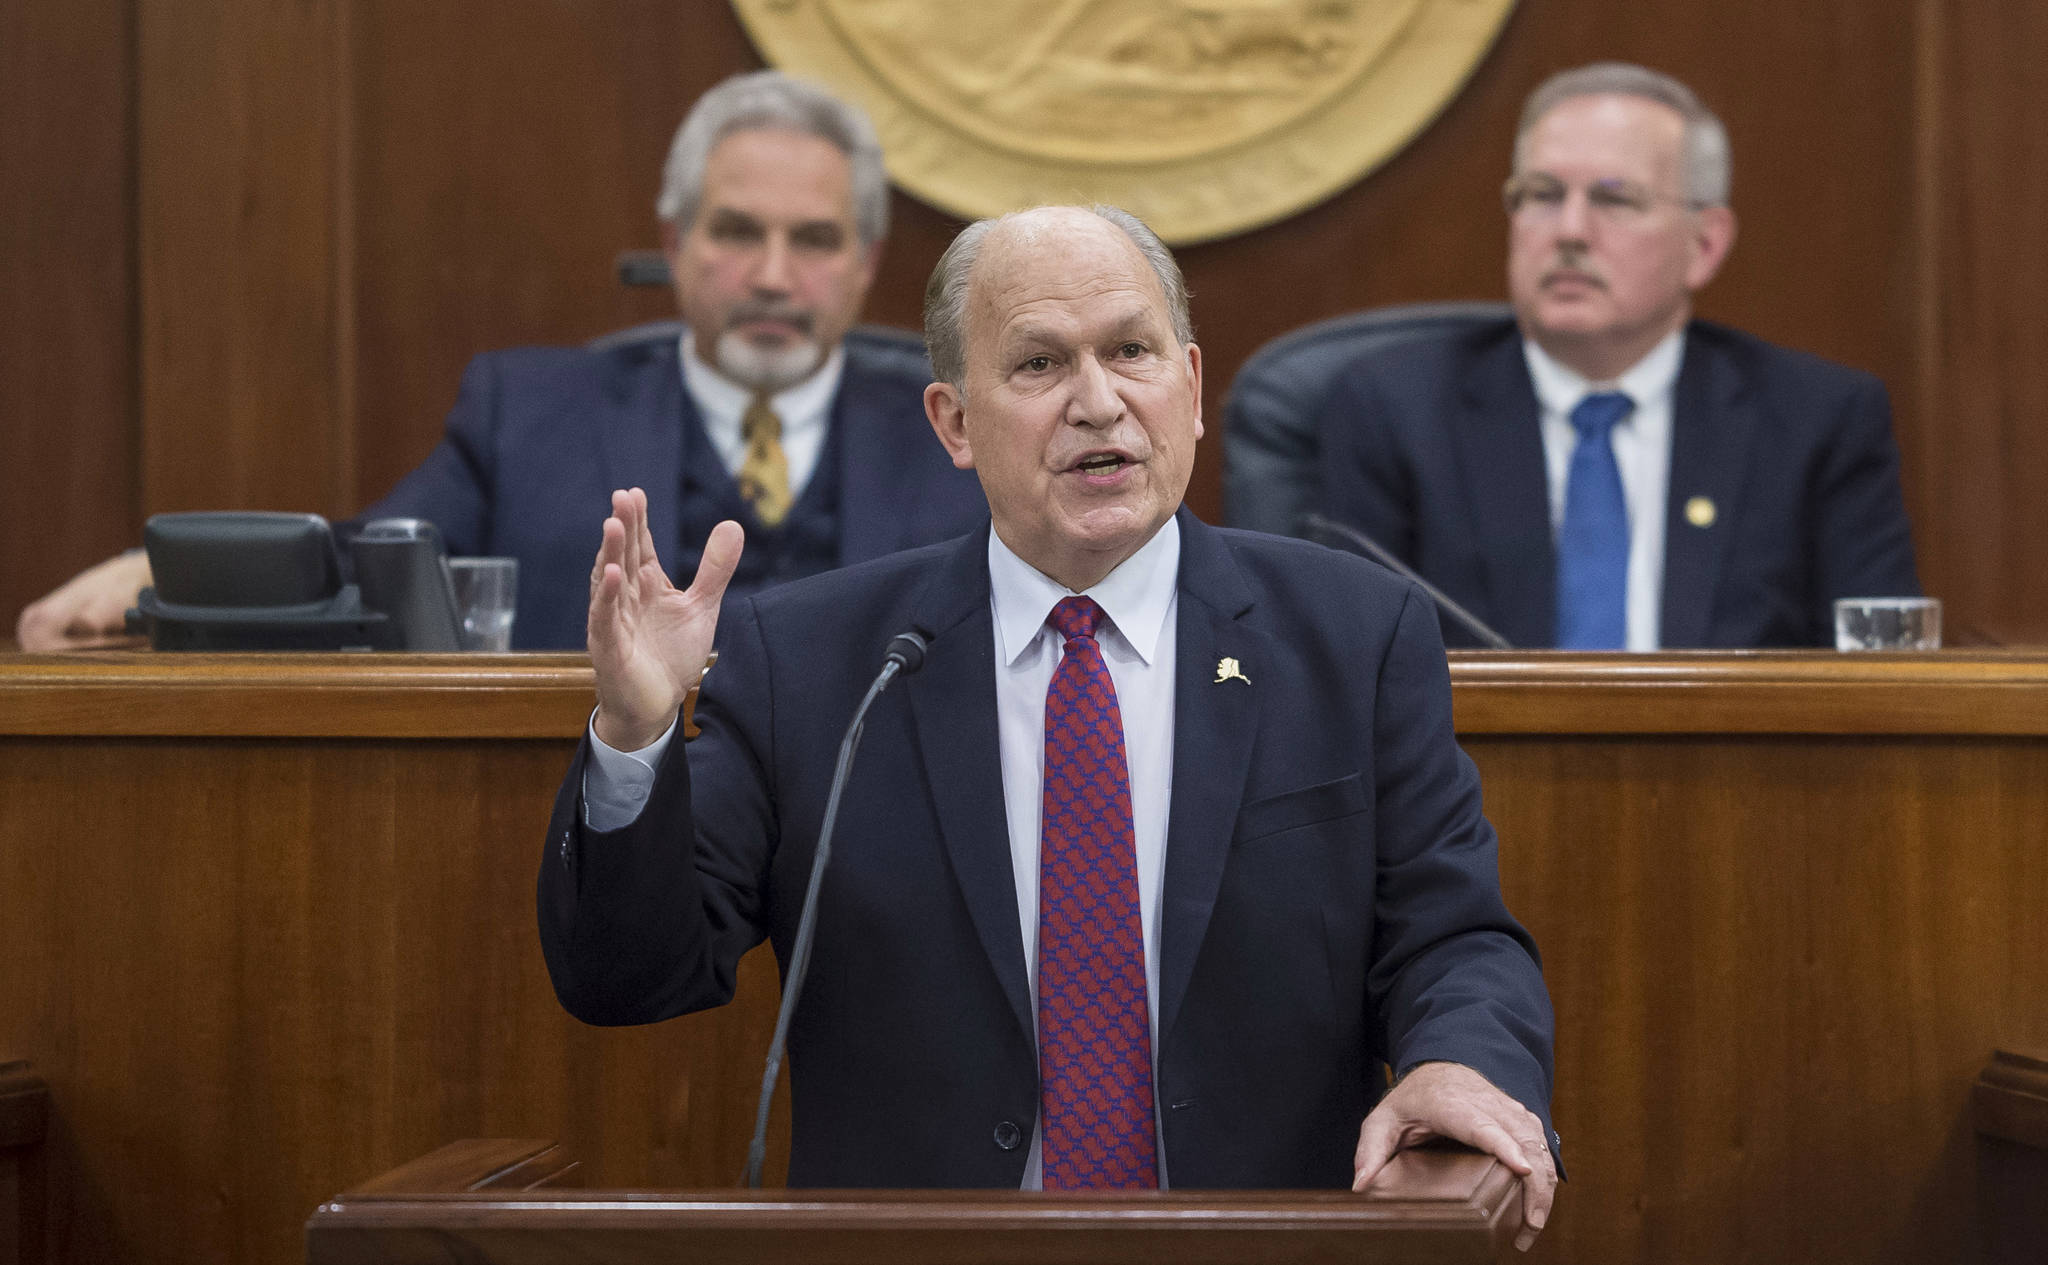 <span class="neFMT neFMT_PhotoCredit">File photo by Michael Penn/Juneau Empire</span>                                In this Jan. 18 photo, Gov. Bill Walker speaks during his State of the State address before a joint session of the Alaska Legislature at the Capitol. Senate President Pete Kelly, R-Fairbanks, left, and Speaker of the House Bryce Edgmon, D-Dillingham, watch from the Speakers desk in the background.